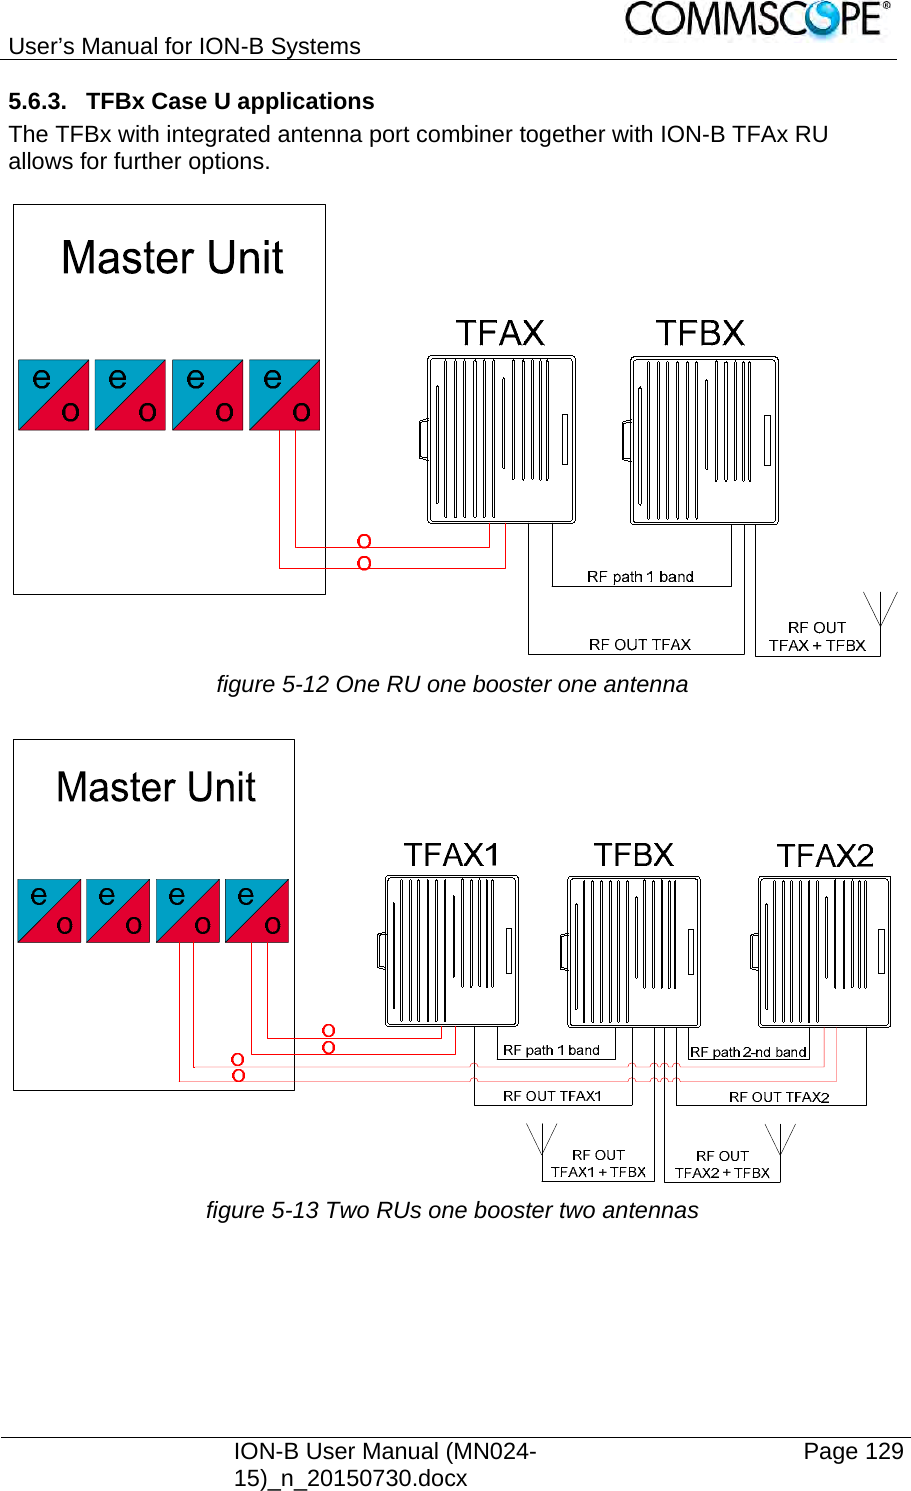 User’s Manual for ION-B Systems    ION-B User Manual (MN024-15)_n_20150730.docx  Page 129 5.6.3.  TFBx Case U applications The TFBx with integrated antenna port combiner together with ION-B TFAx RU allows for further options.   figure 5-12 One RU one booster one antenna   figure 5-13 Two RUs one booster two antennas    